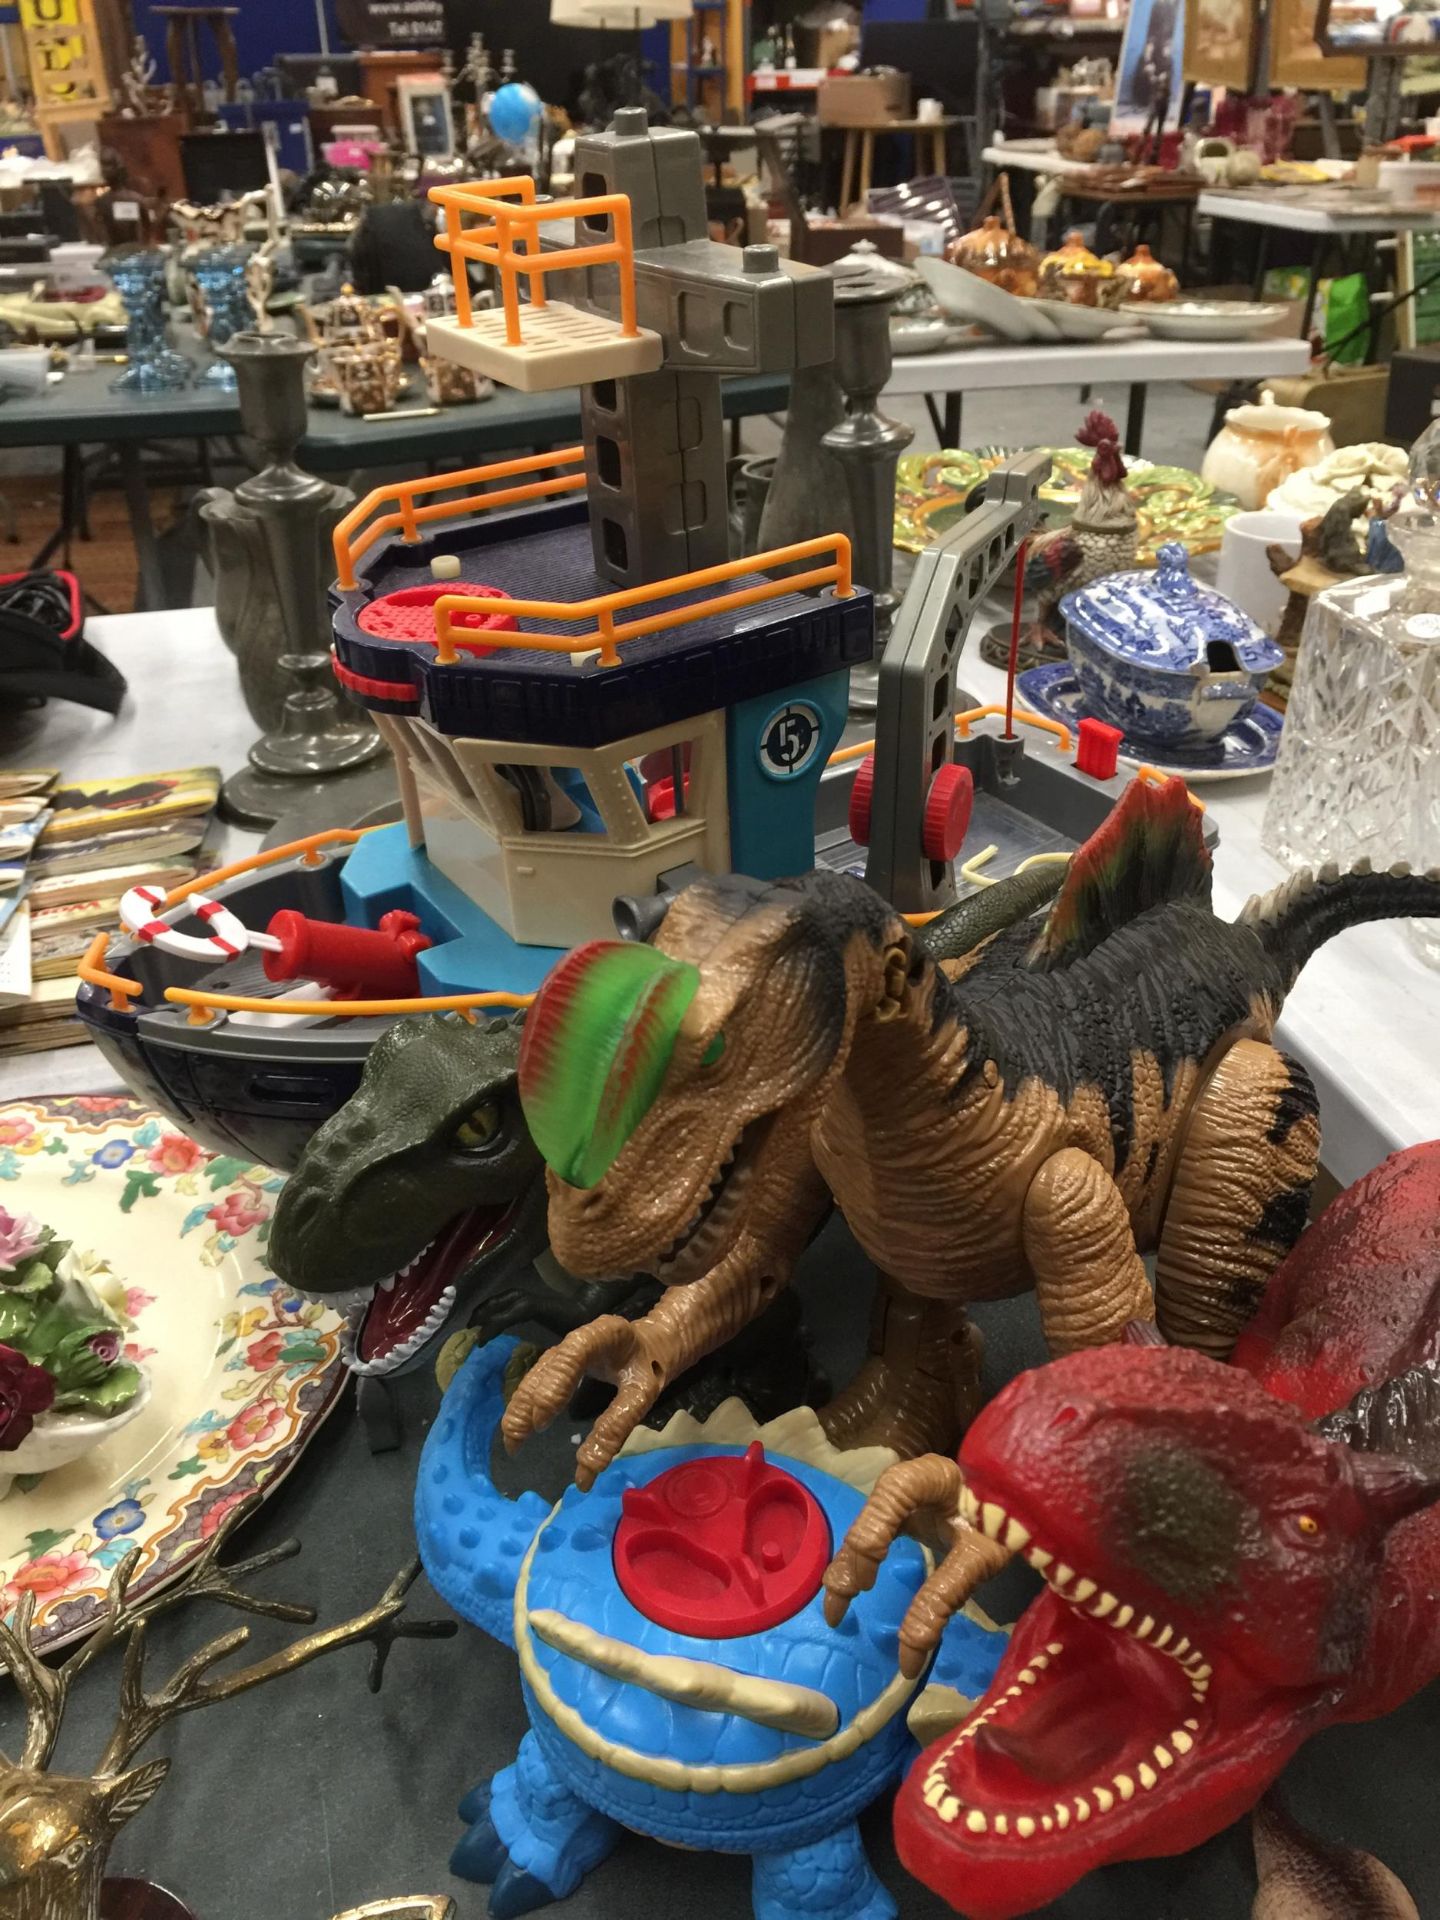 A QUANTITY OF TOYS TO INCLUDE DINOSAURS, A BOAT, ETC - Image 3 of 3